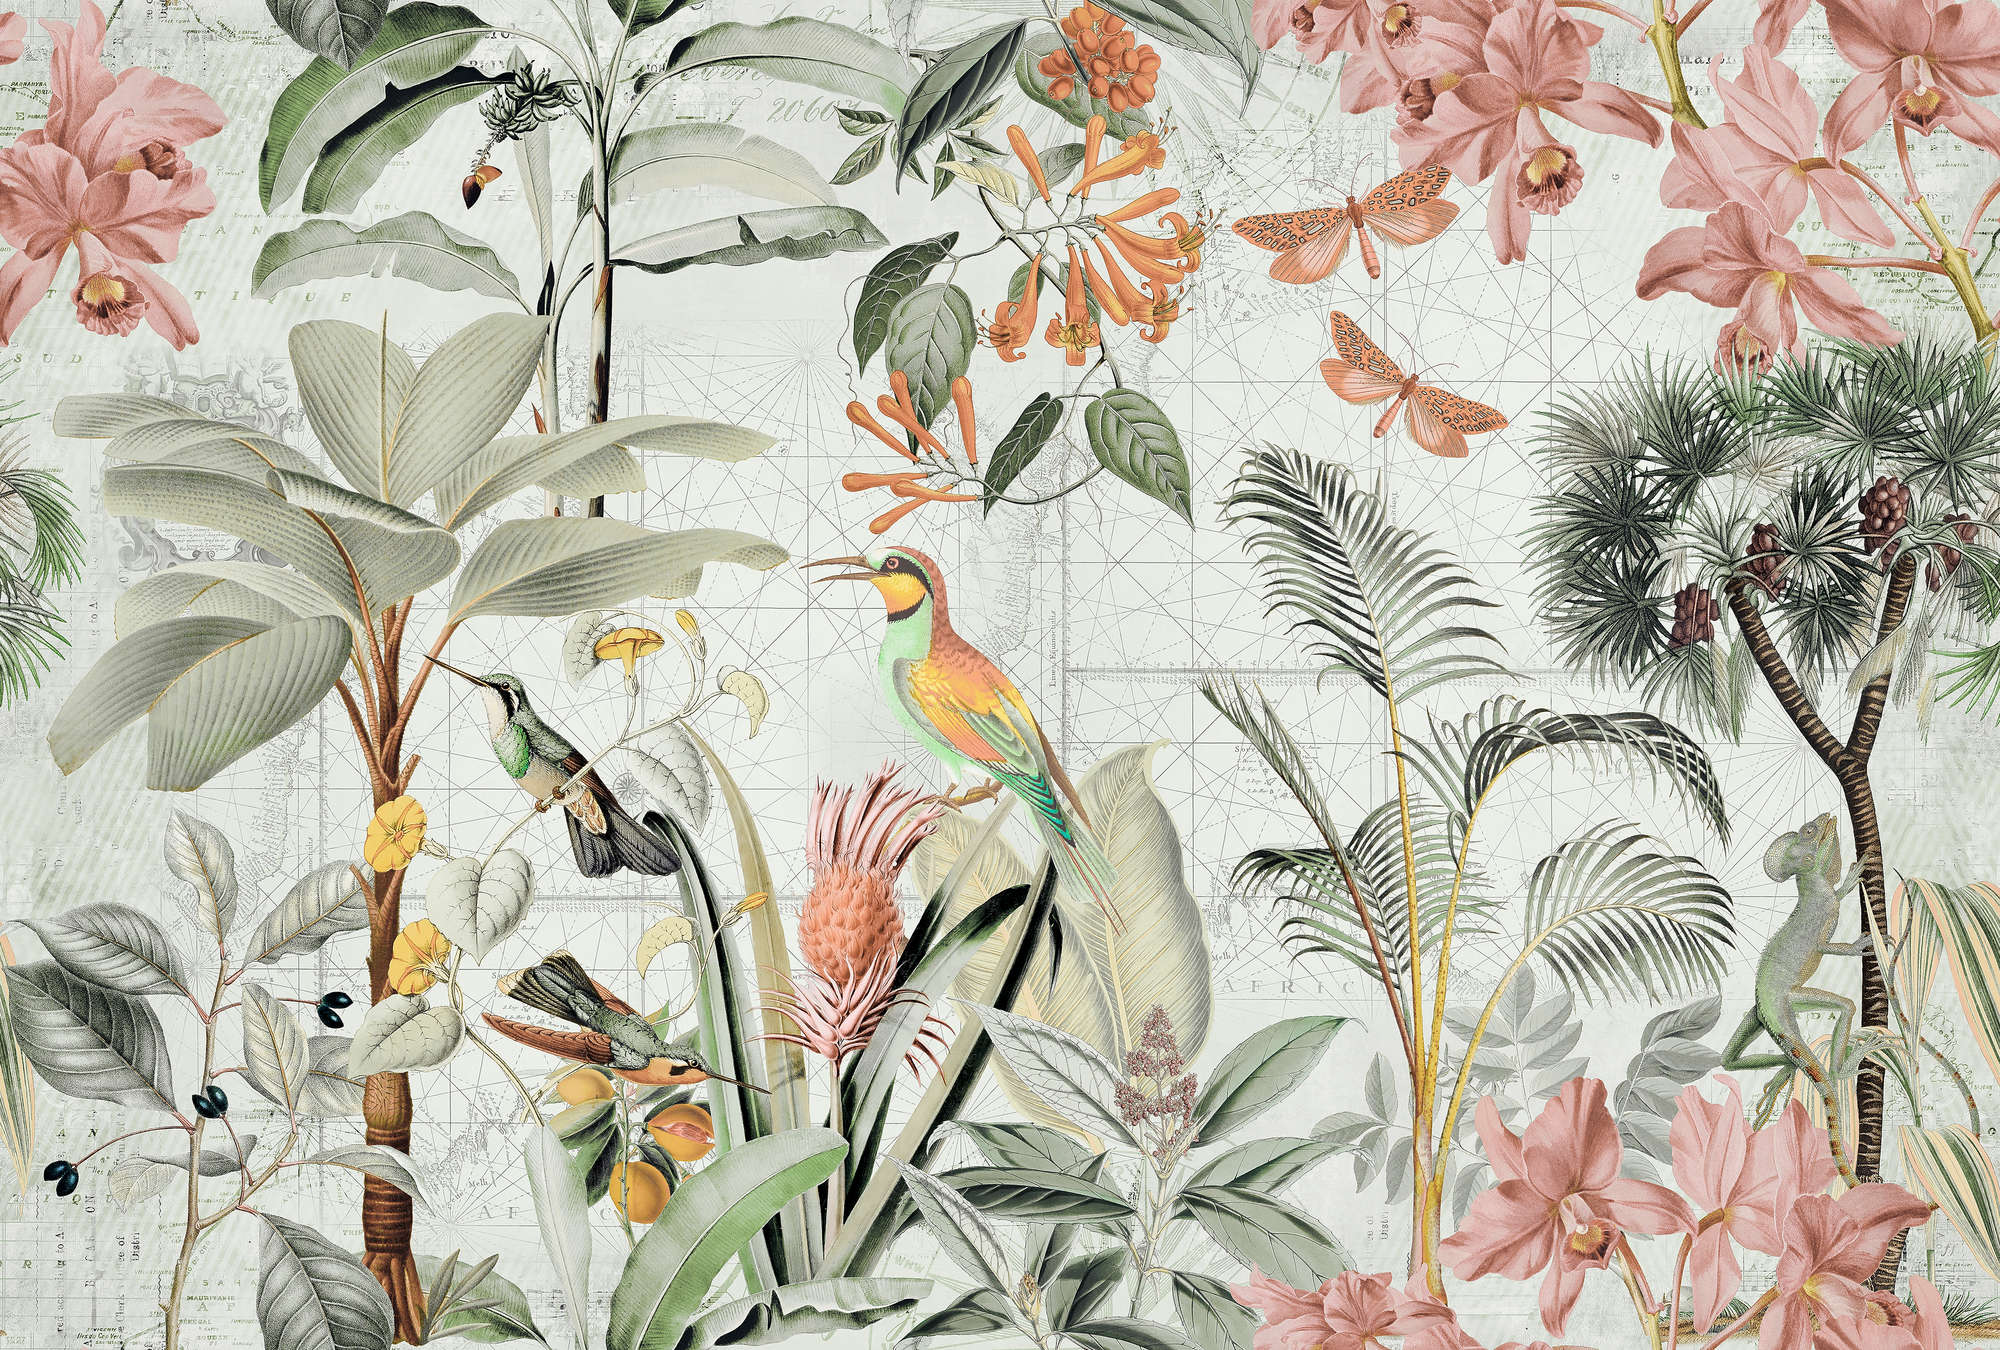             Photo wallpaper jungle collage with tropics flowers & birds
        